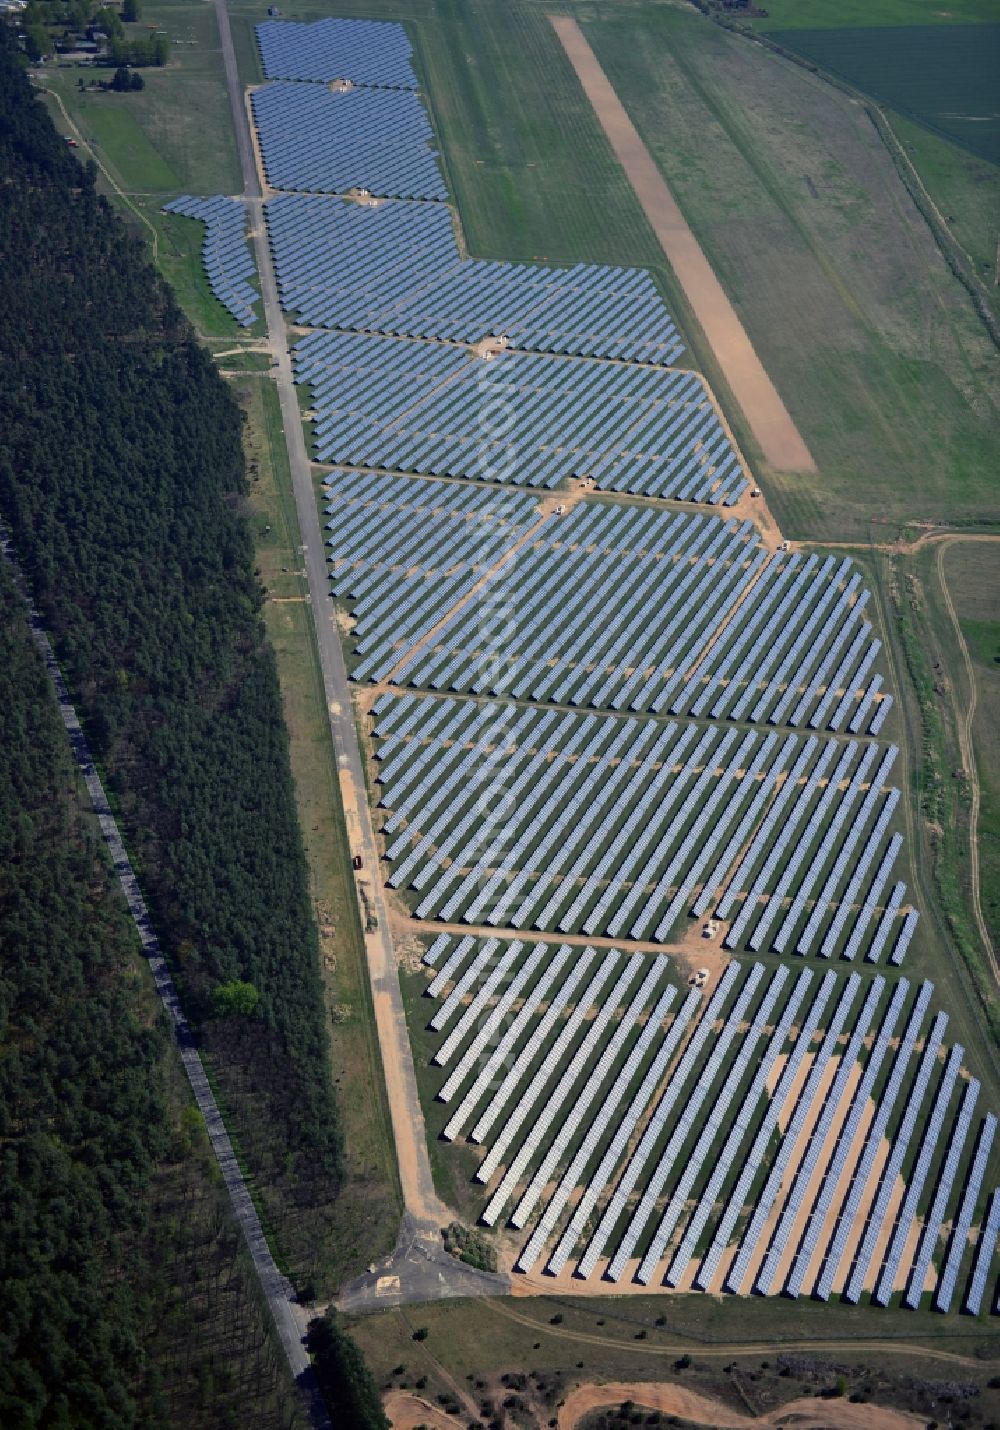 Aerial image Eggersdorf bei Müncheberg - View at the of the solar energy park at the airport Eggersdorf in Brandenburg